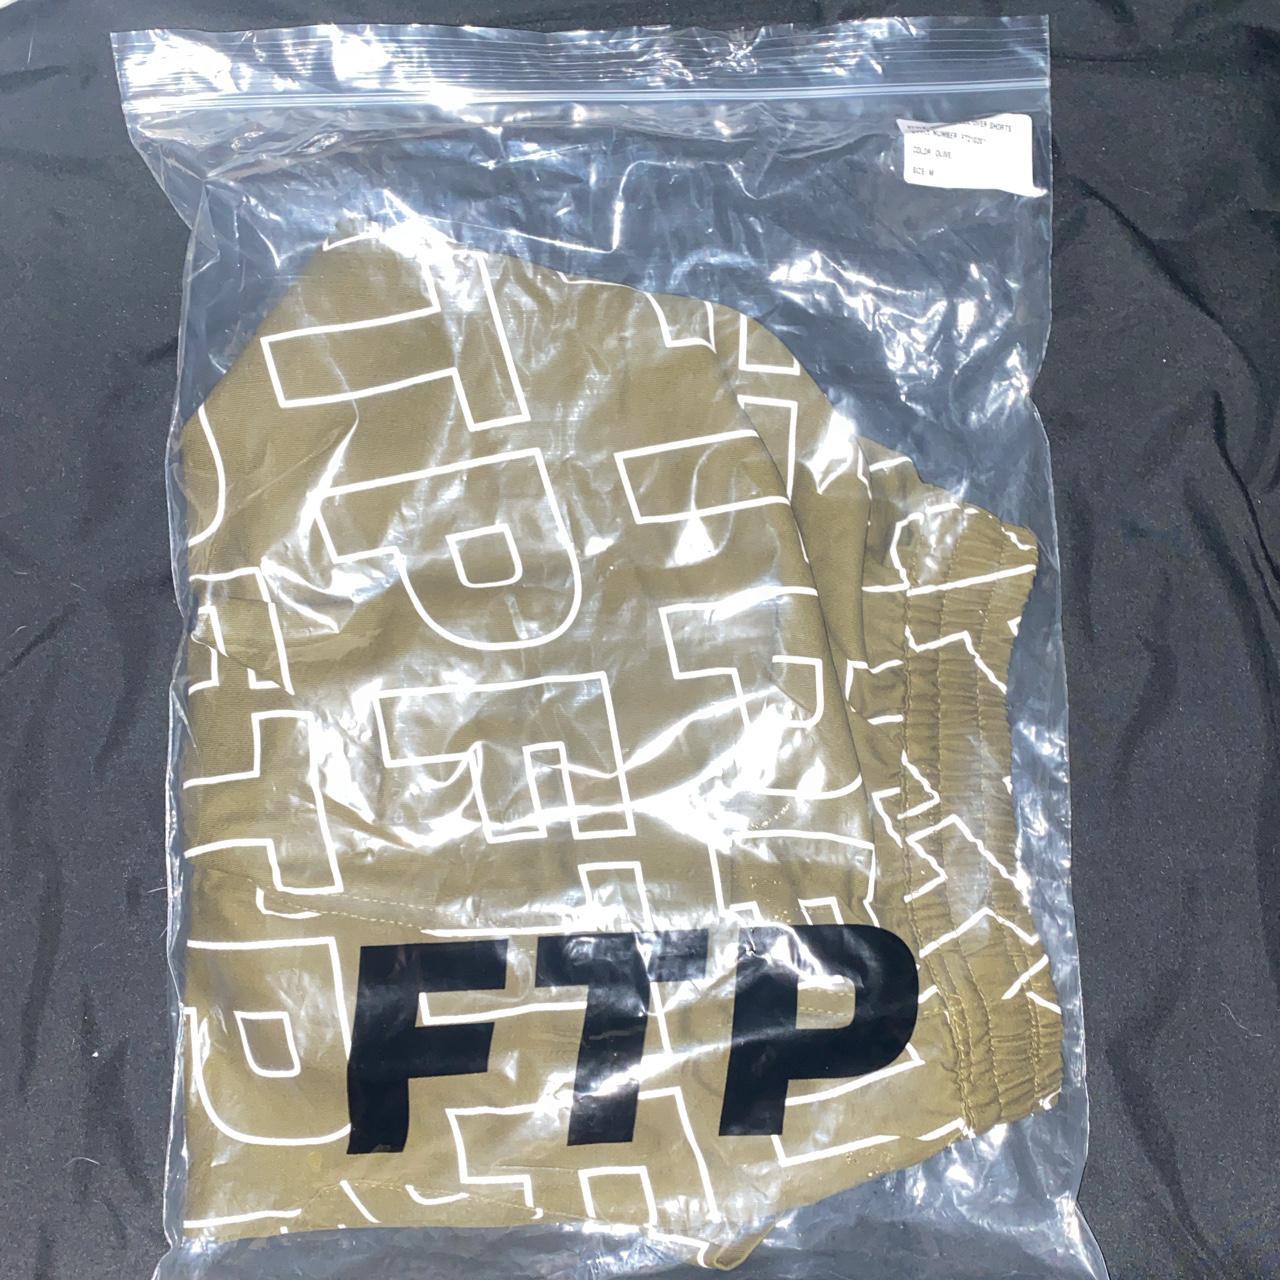 Product Image 1 - #FTP #FUCKTHEPOPULATION #ALLOVER

FTP All Over